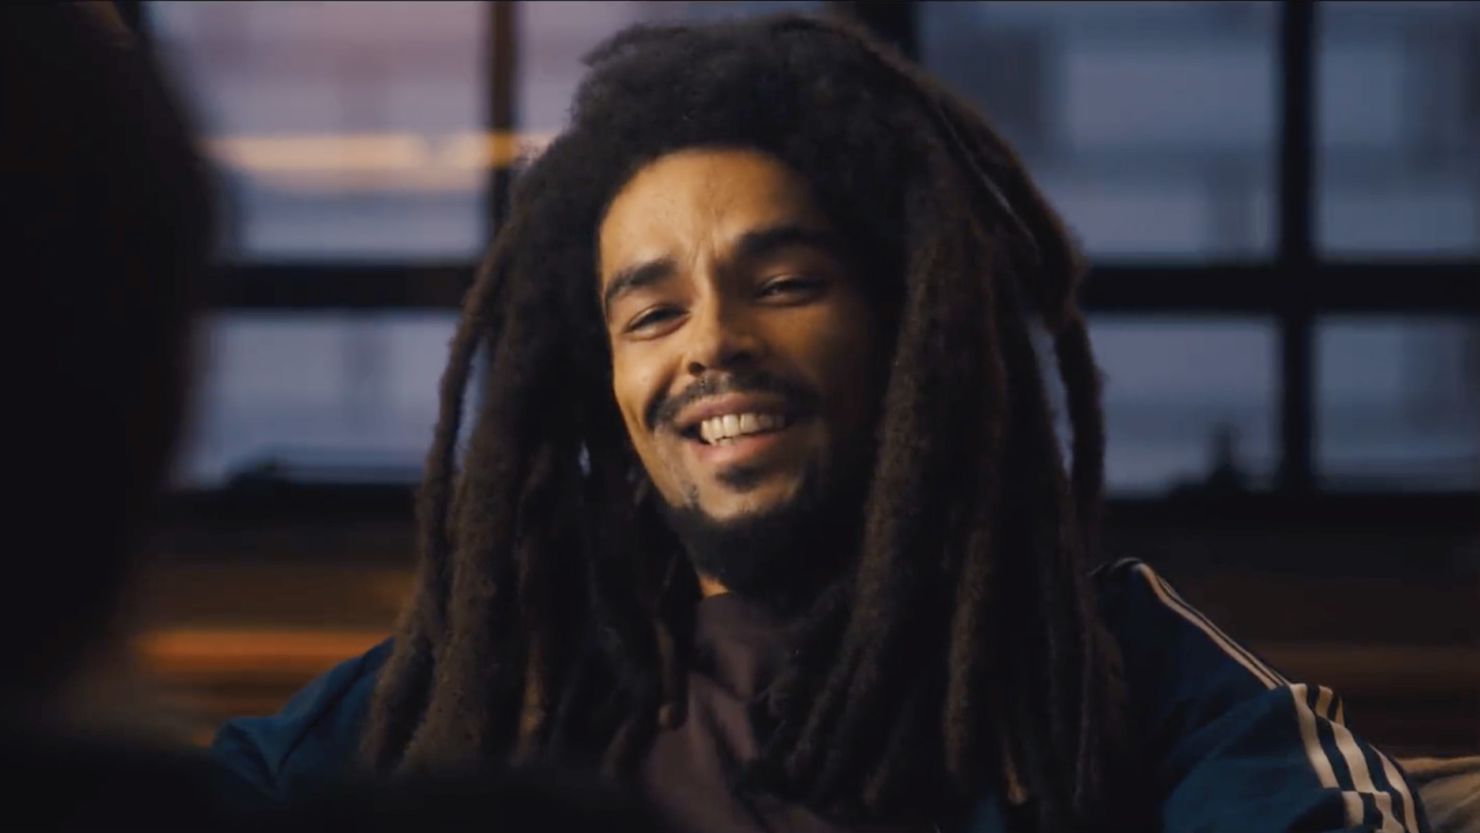 A trailer for the Bob Marley biopic has dropped. Here’s what we know CNN